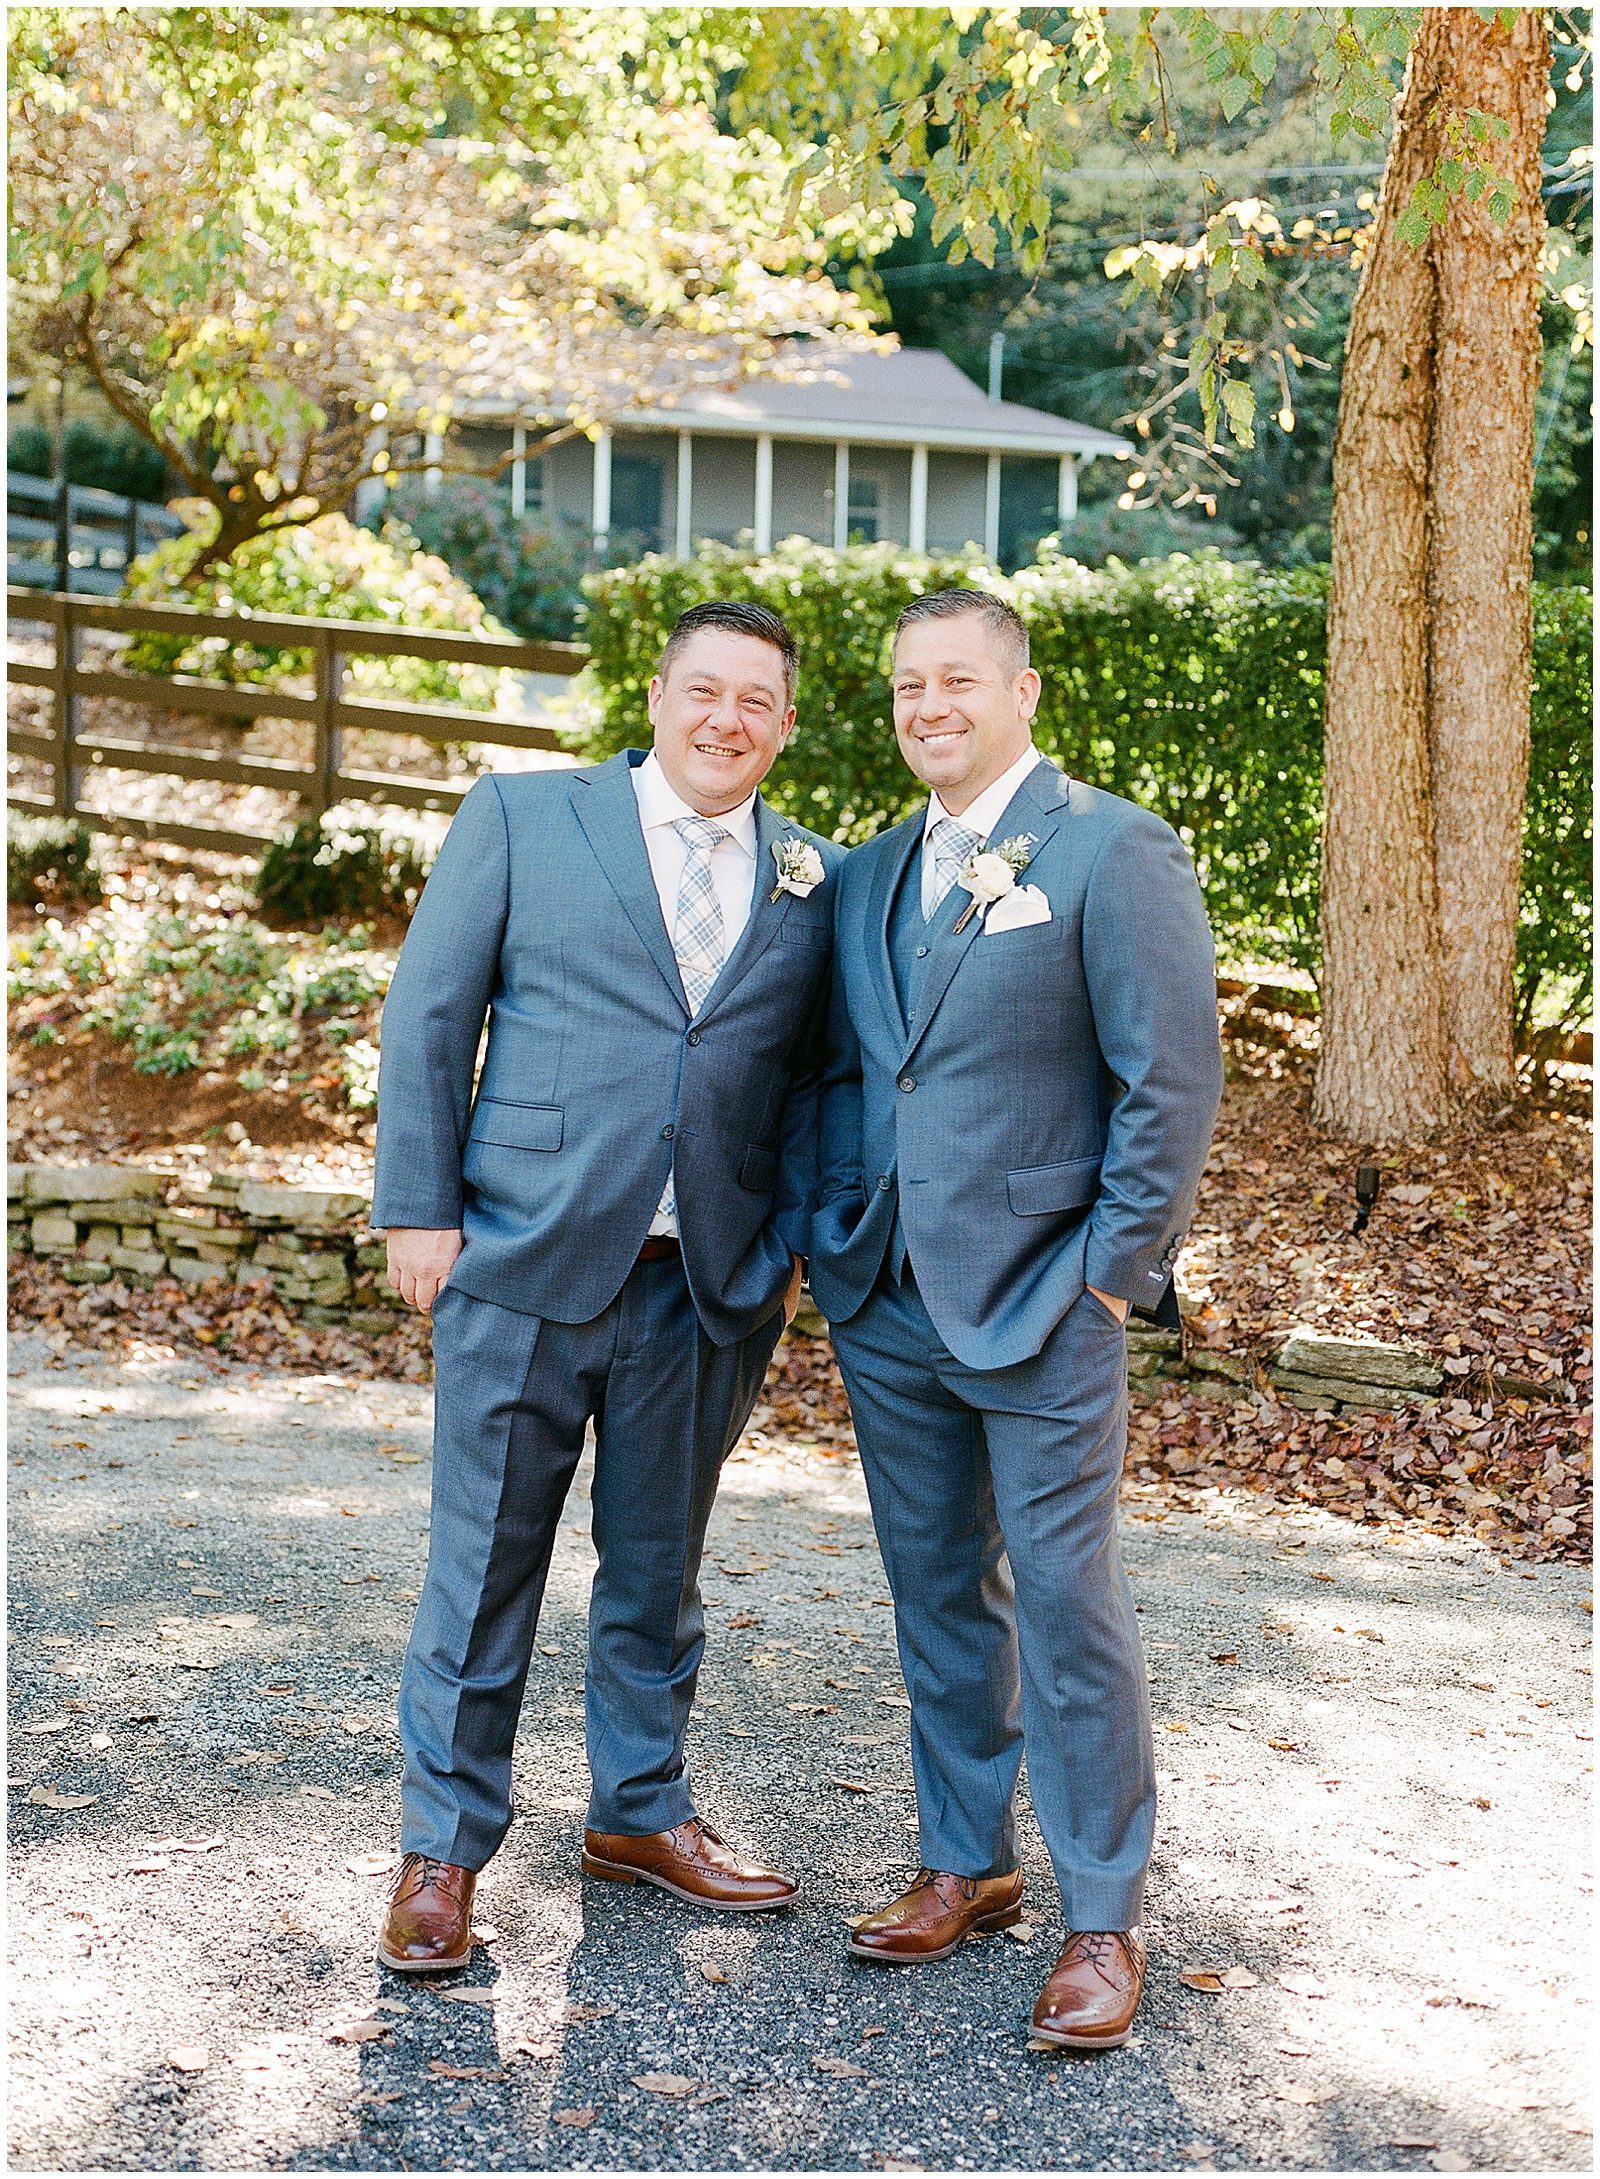 Groom with Best man Photo